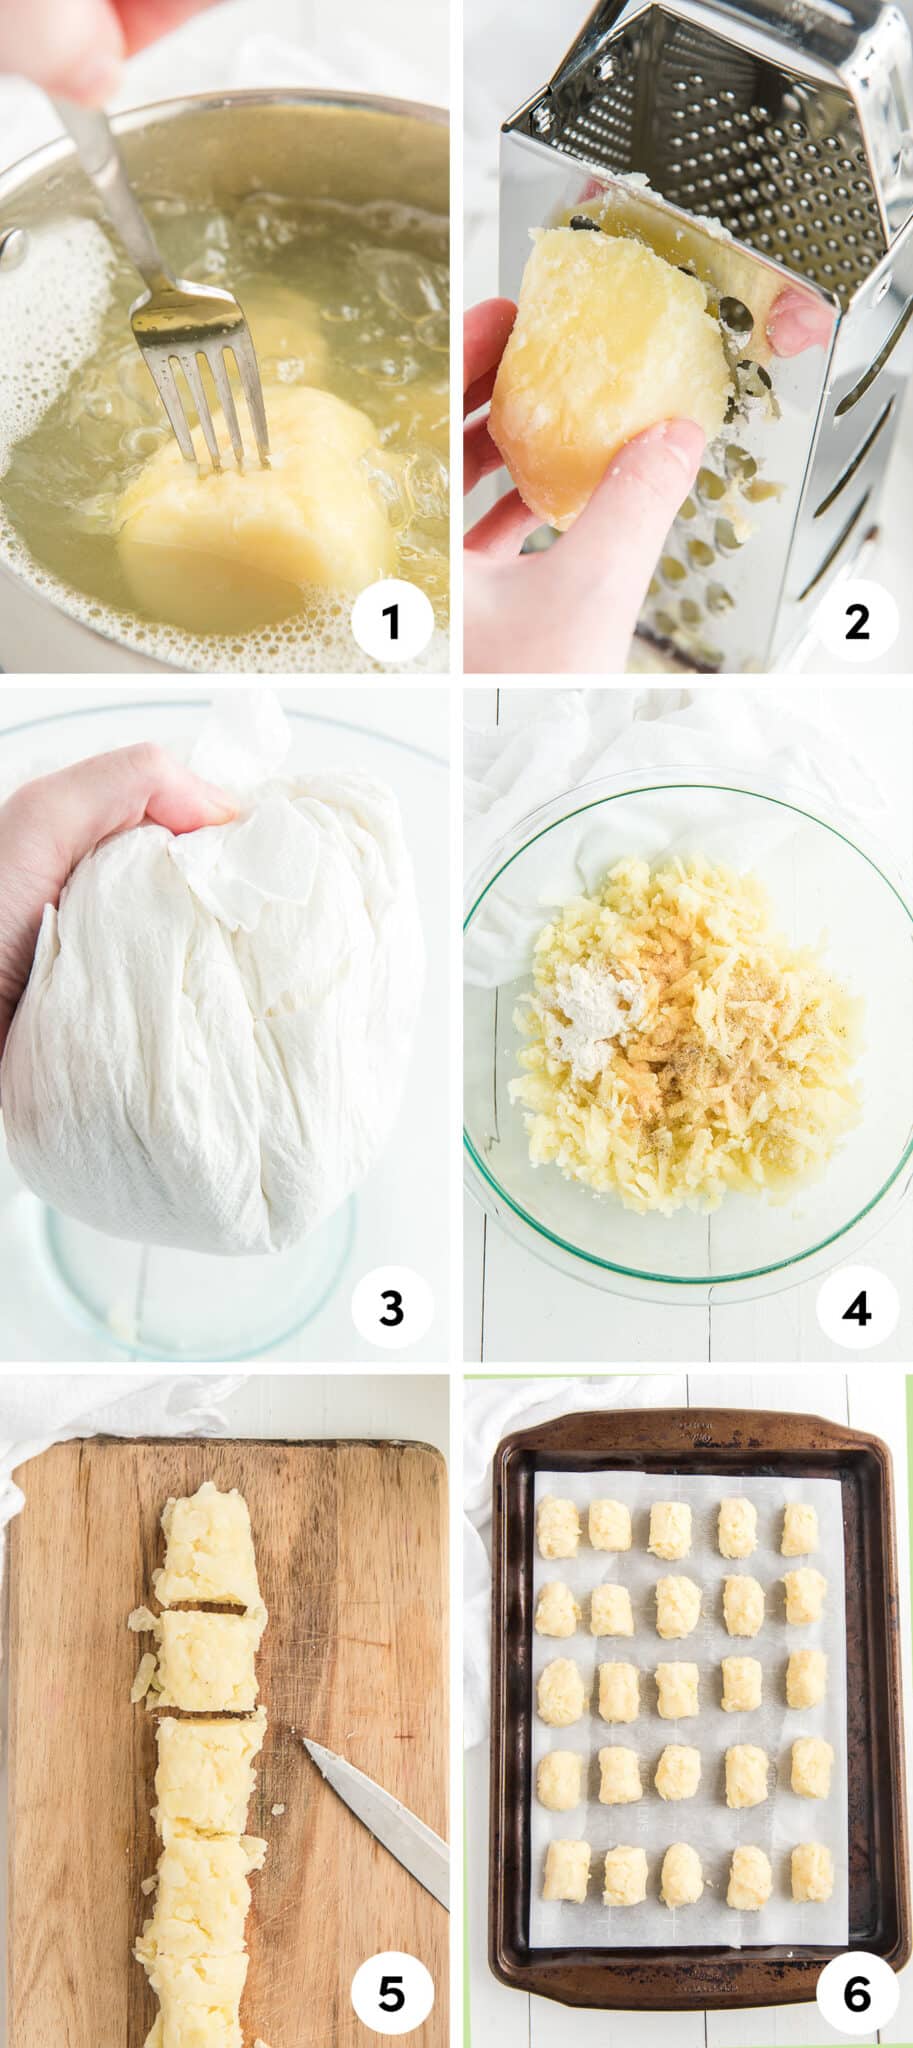 step-by-step process of how to make homemade tater tots./
